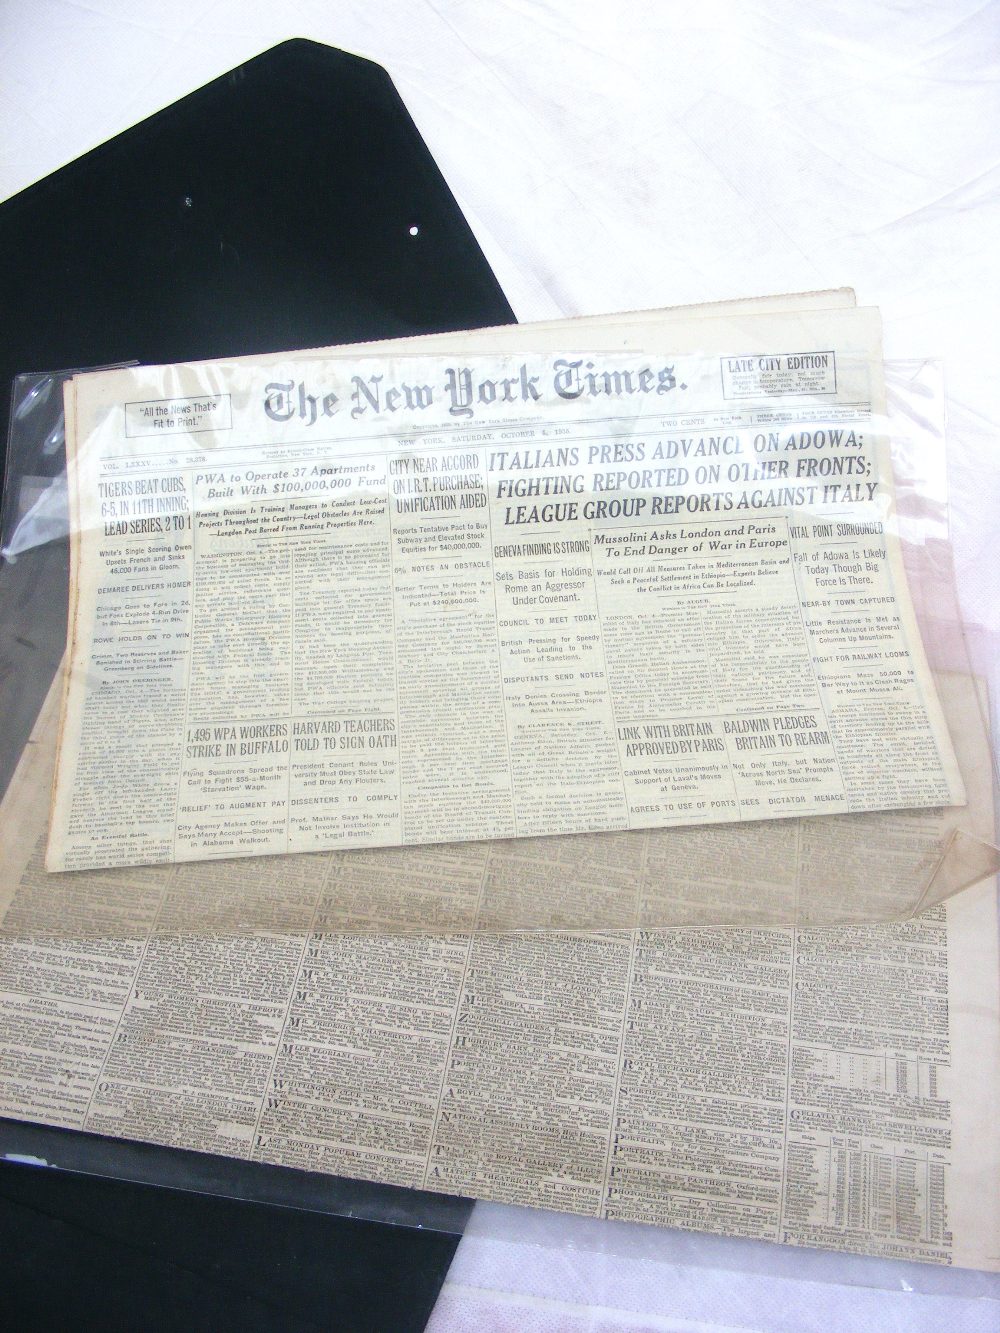 An original "New York Times" newspaper from "Saturday October 5 1935", with a certificate from